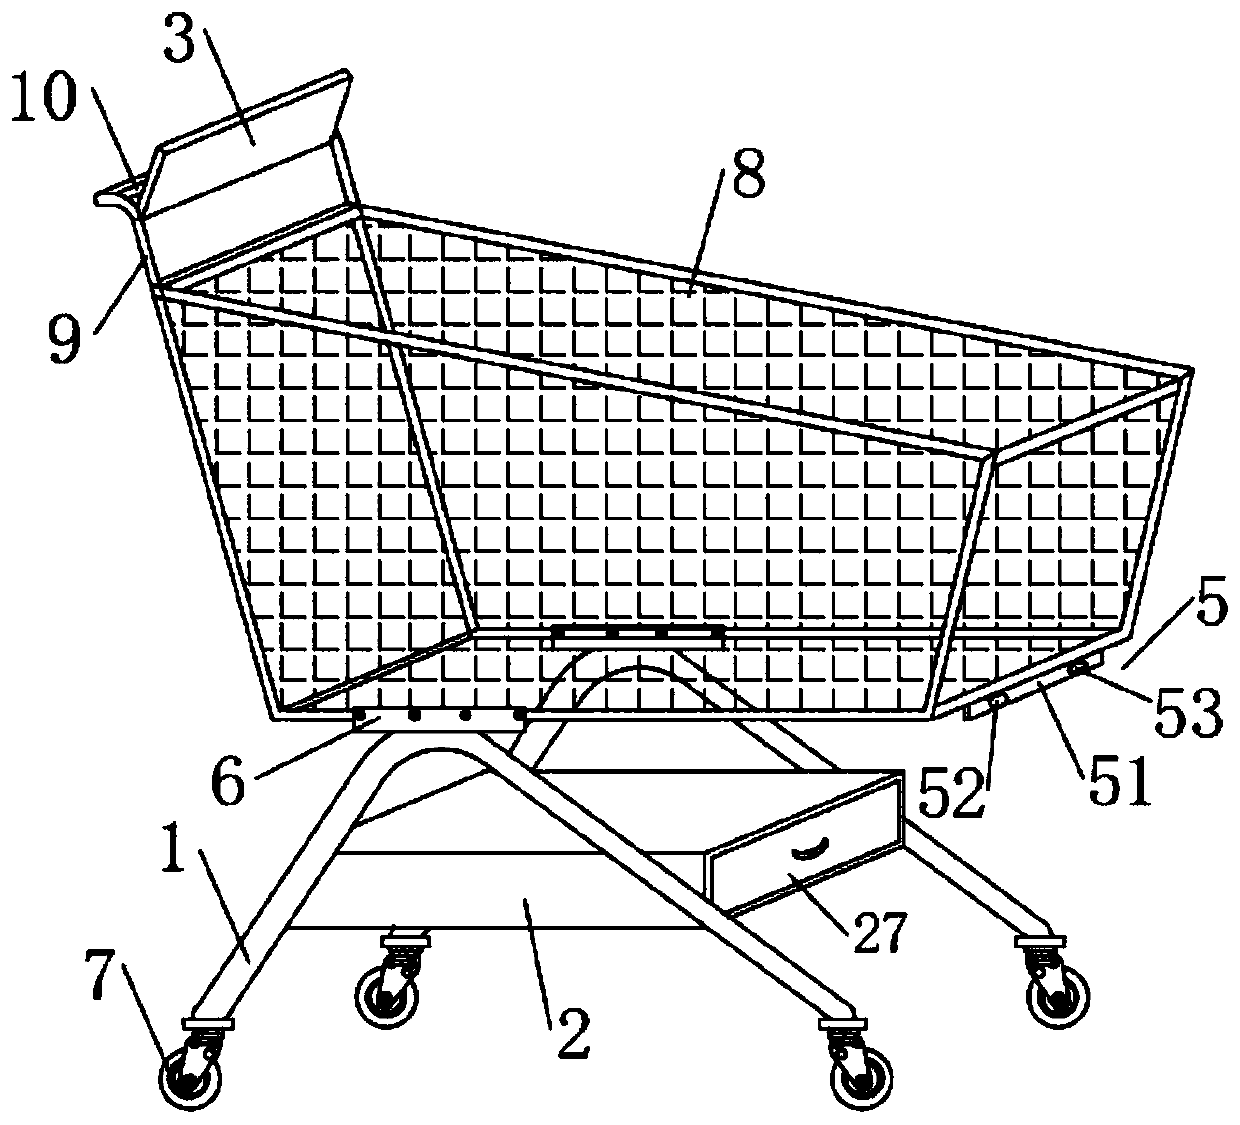 Internet of Things-based intelligent shopping trolley for supermarket